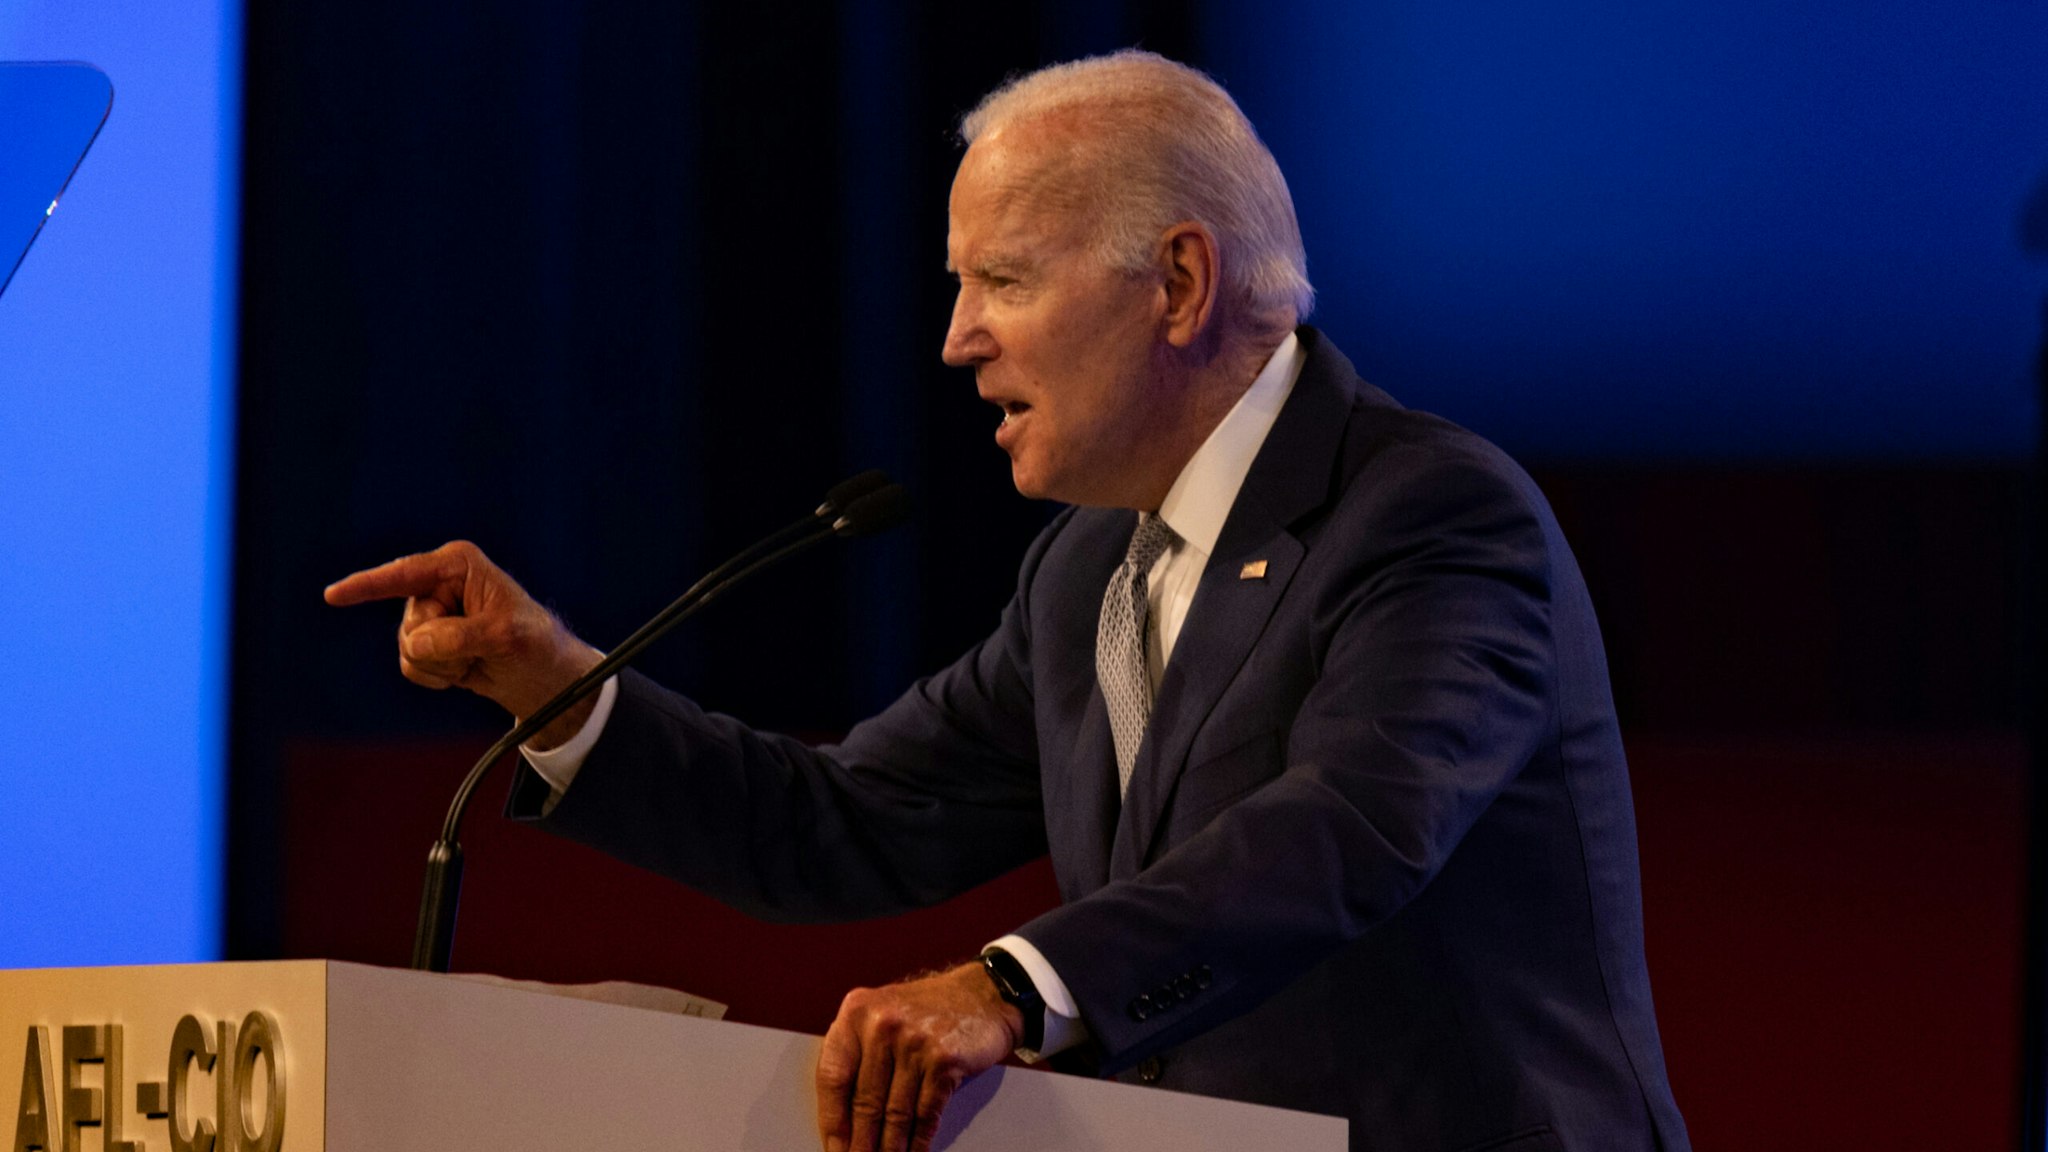 PHILADELPHIA, PA - JUNE 14: U.S. President Joe Biden delivers remarks at the 29th AFL-CIO Quadrennial Constitutional Convention on June 14, 2022 in Philadelphia, Pennsylvania. This labor union event, which normally occurs every four years, was postponed from October 2021 to June 2022 due to COVID-19.